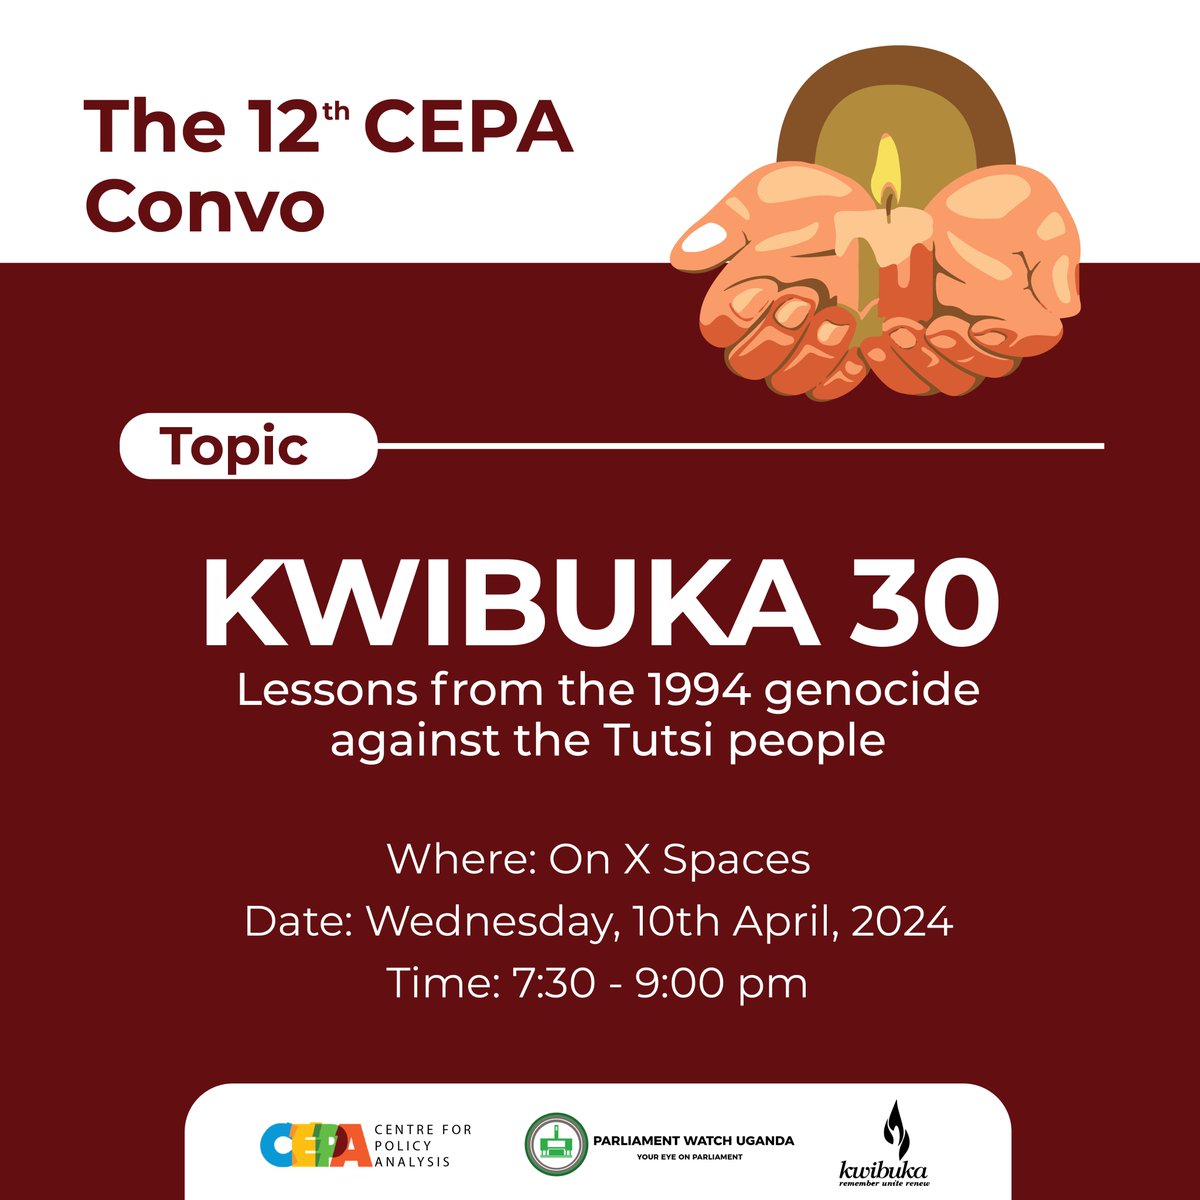 Join us today at 7:30 pm for #TheCEPAconvo on Kwibuka 30: Lessons from the 1994 genocide against the Tutsi people. #Xspaces Set a reminder - twitter.com/i/spaces/1OdKr…